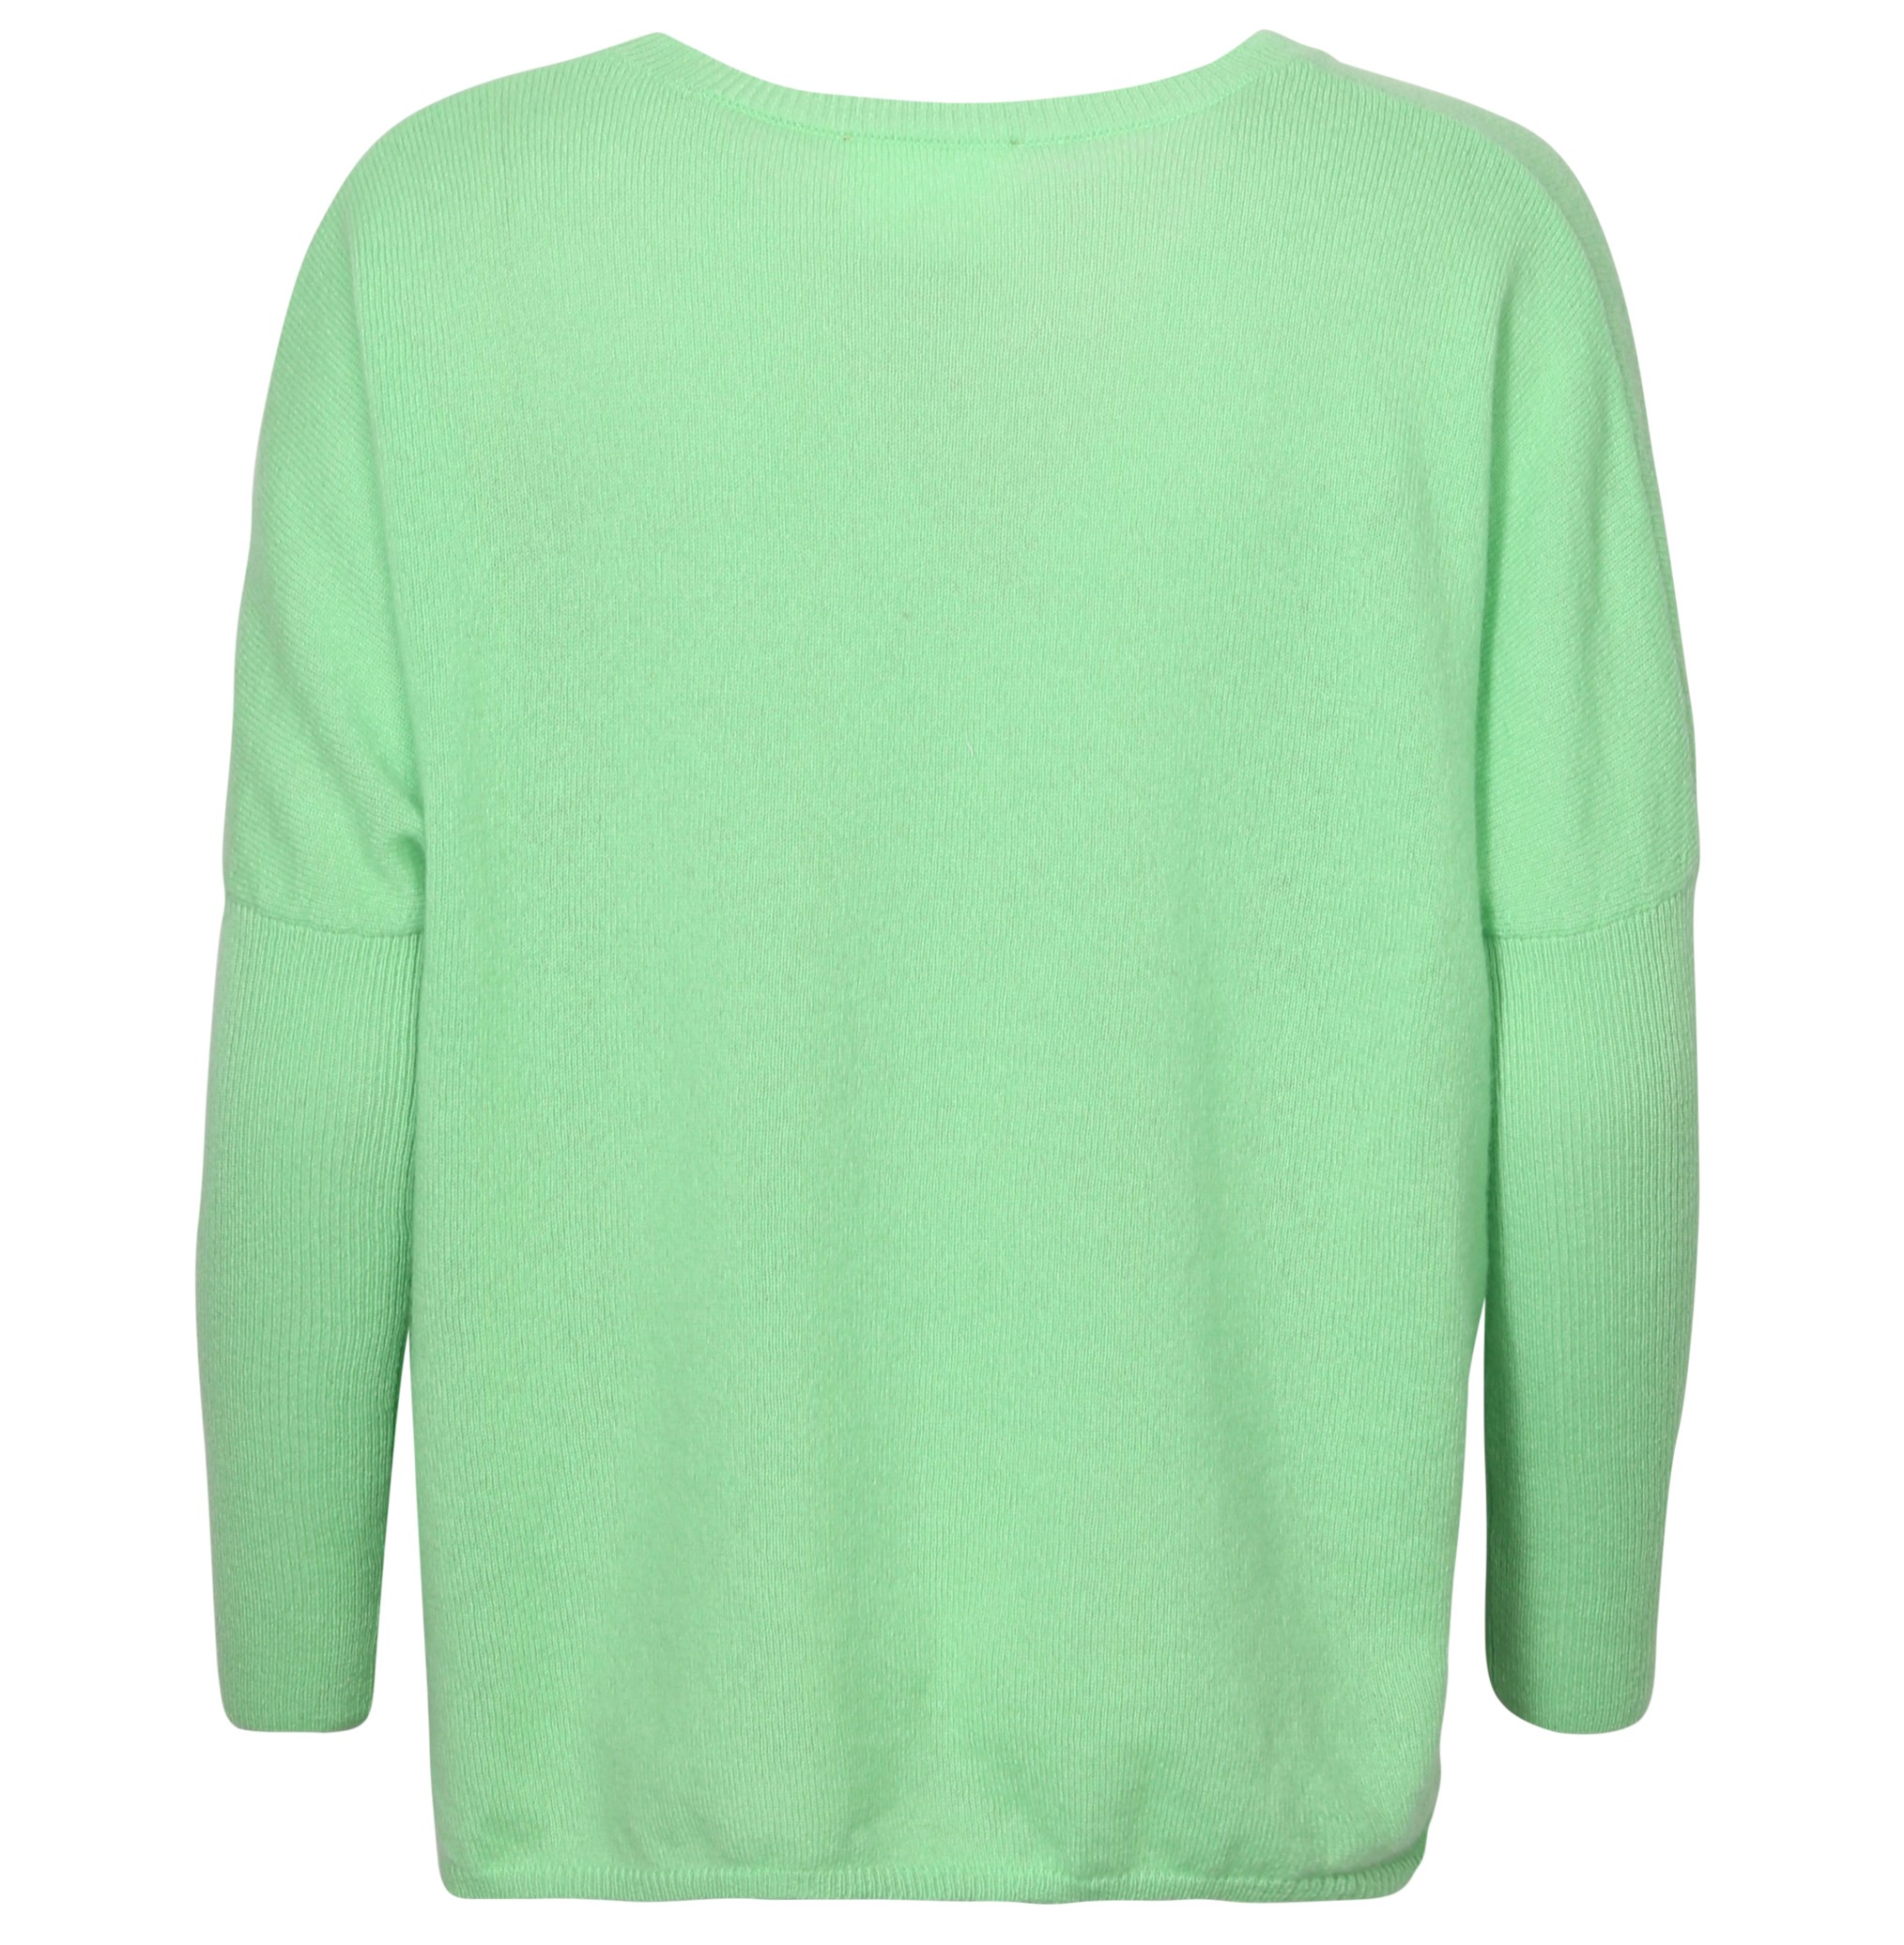 ABSOLUT CASHMERE Poncho Sweater in Light Green